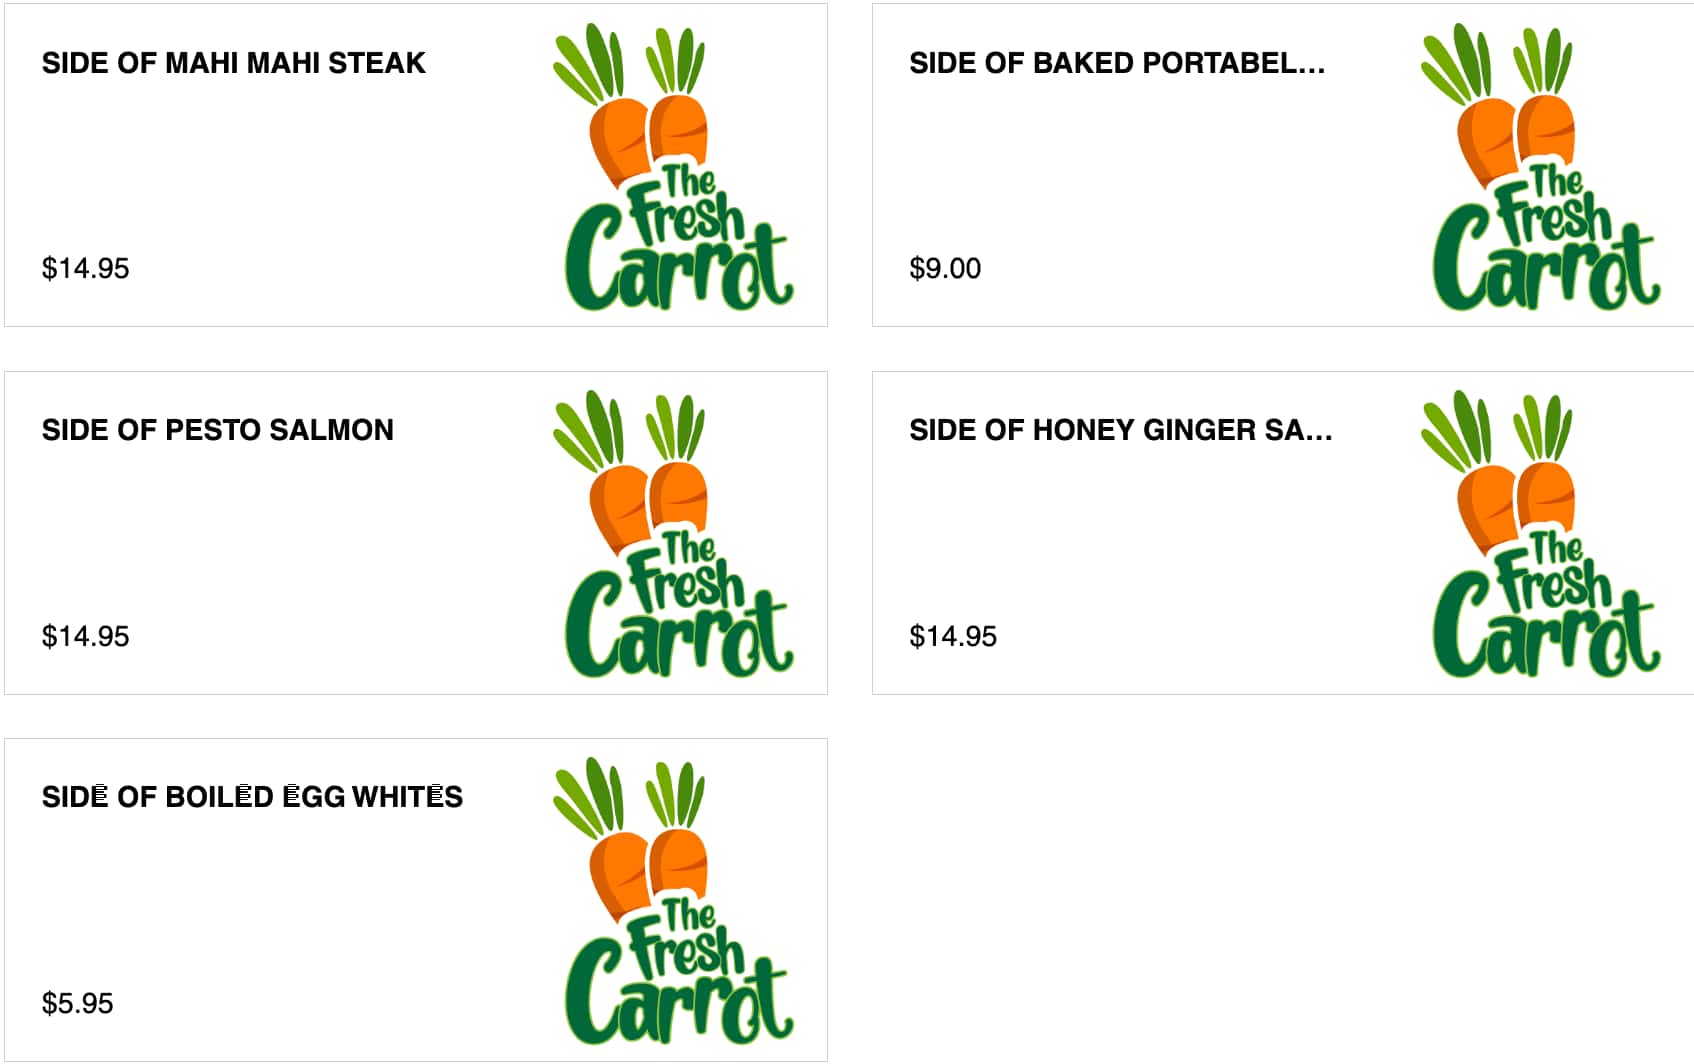 The Fresh Carrot Side Proteins Menu